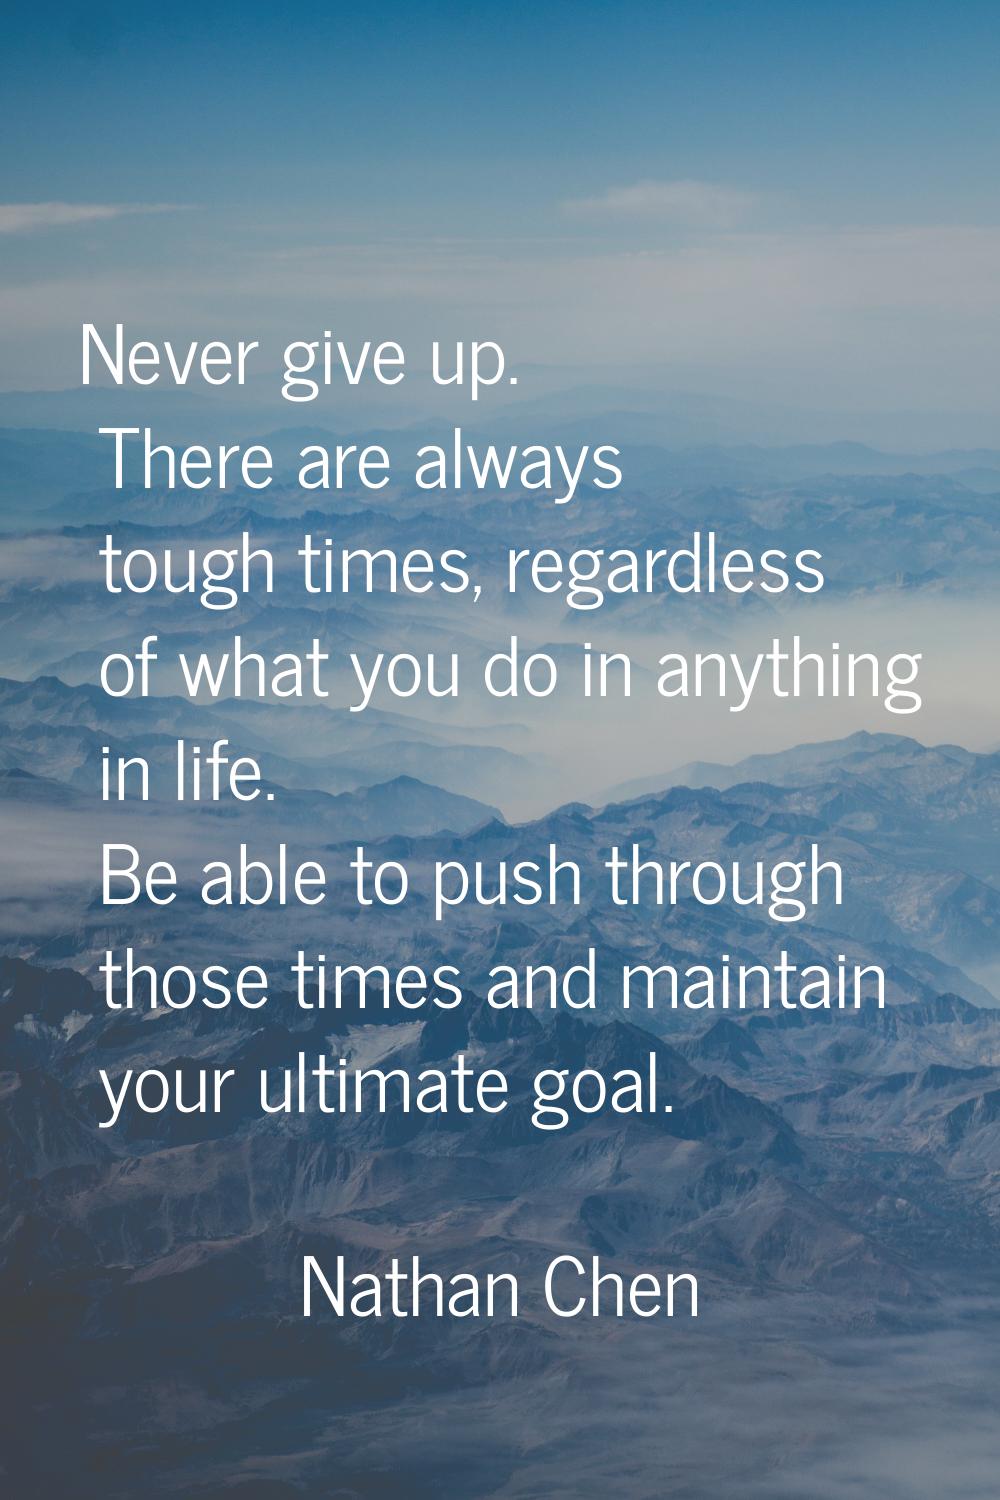 Never give up. There are always tough times, regardless of what you do in anything in life. Be able